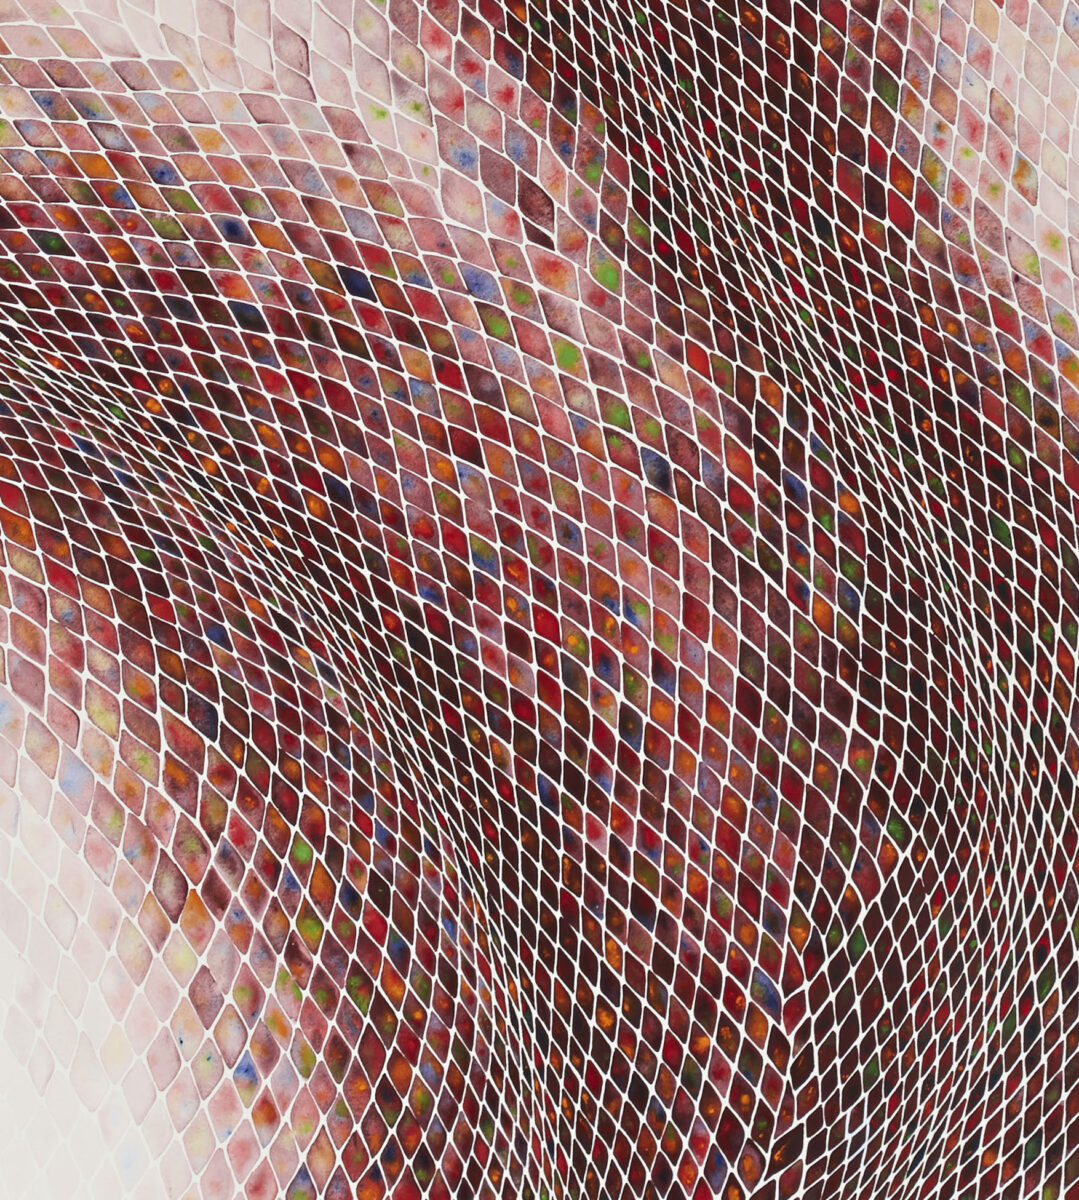 White grid in square pattern, distorted into diamond shapes as if on fabric. Cells are painted with warm jewel tones and white, grouped to suggest dimension of grid. Credit: Timothy Lee.